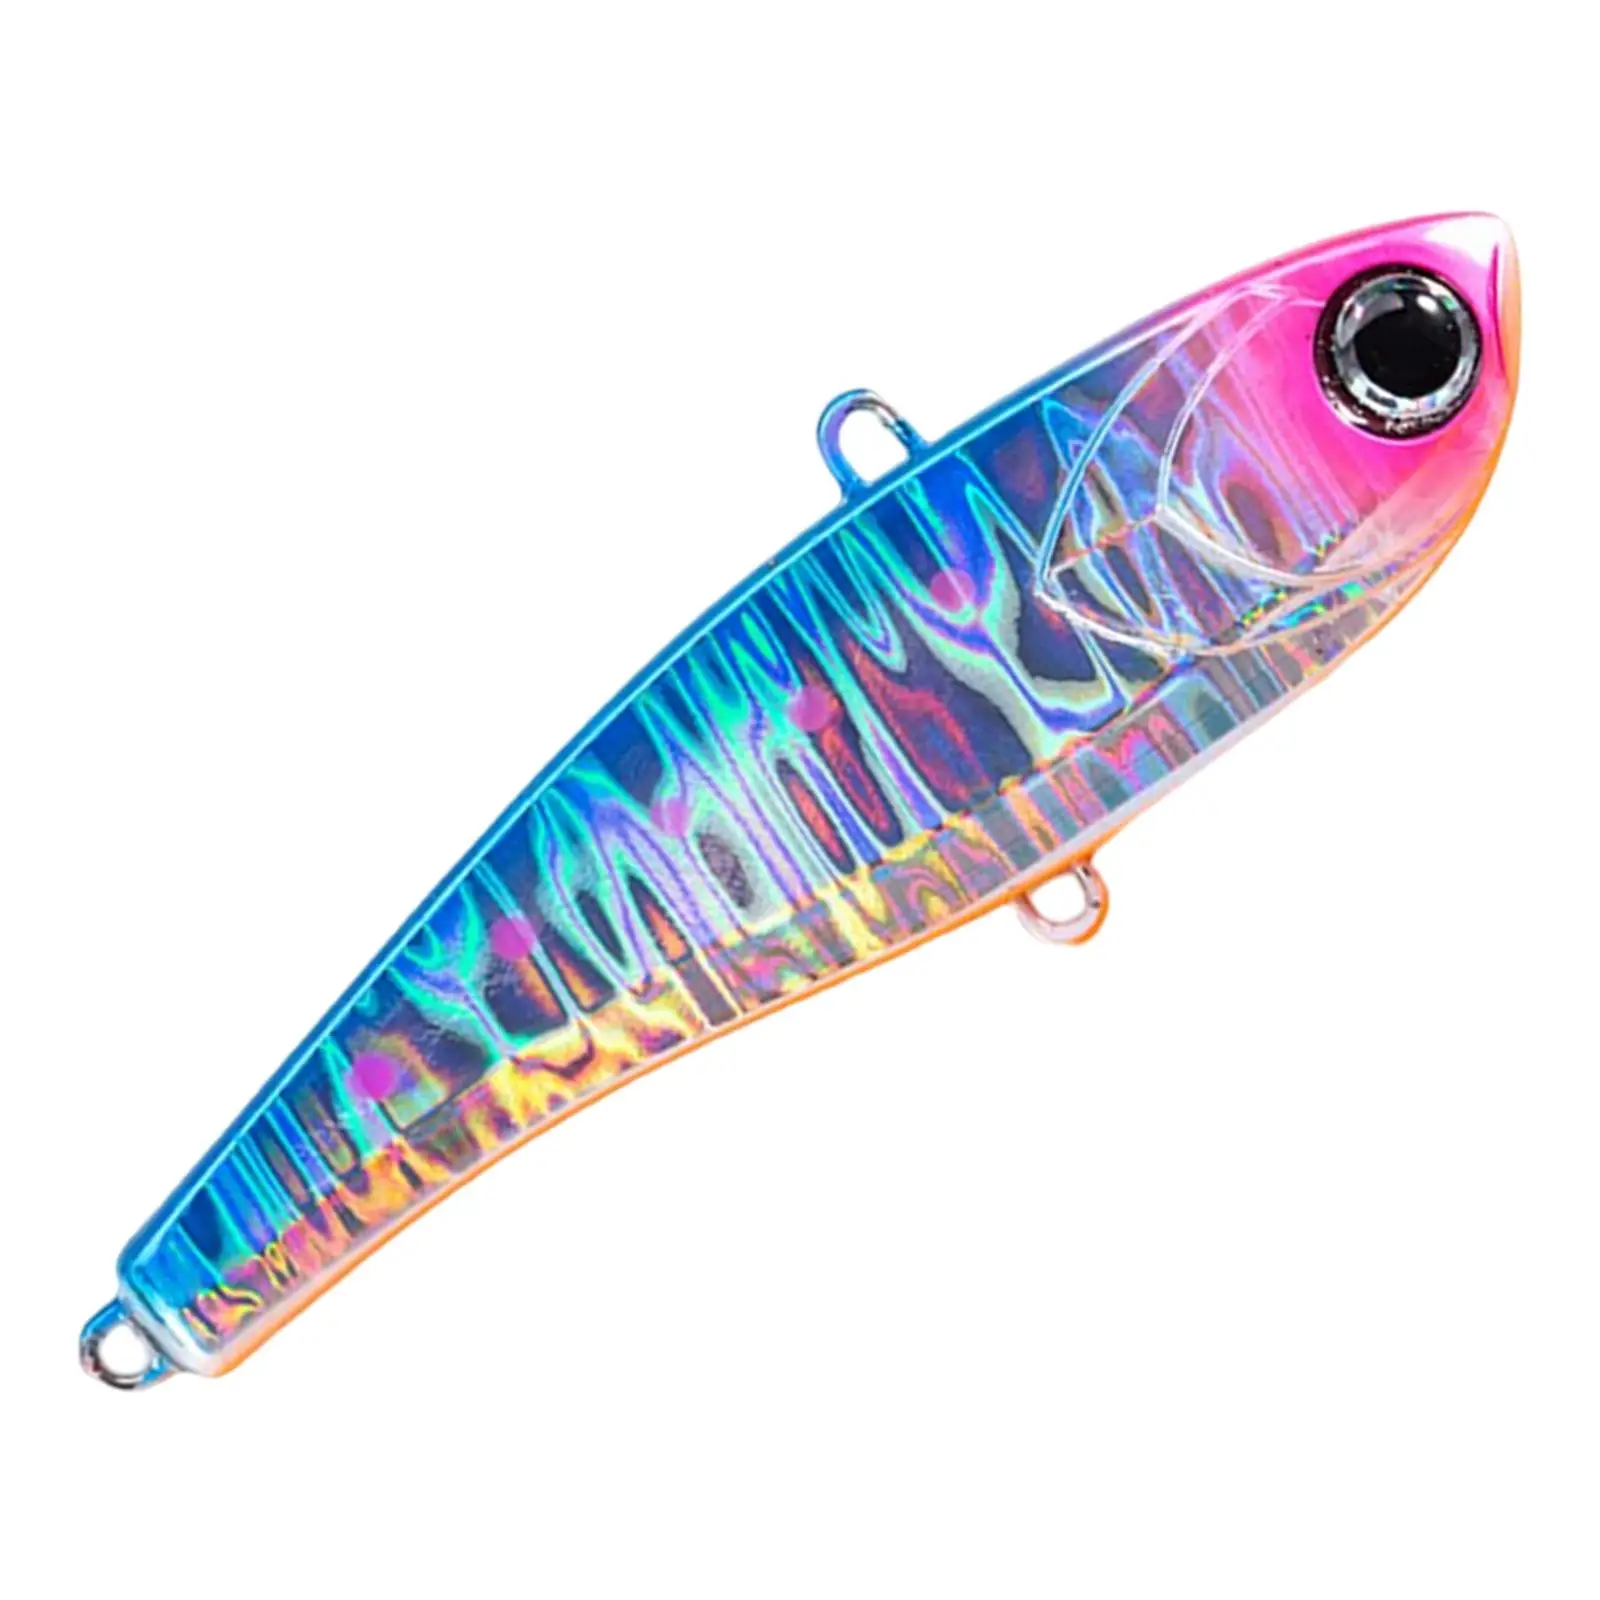 1PC Bass Bait Tackle Rattling Sinking Vibration High Pitch Life-Like High Quality 3D Eyes Crankbaits Lures Winter Fishing